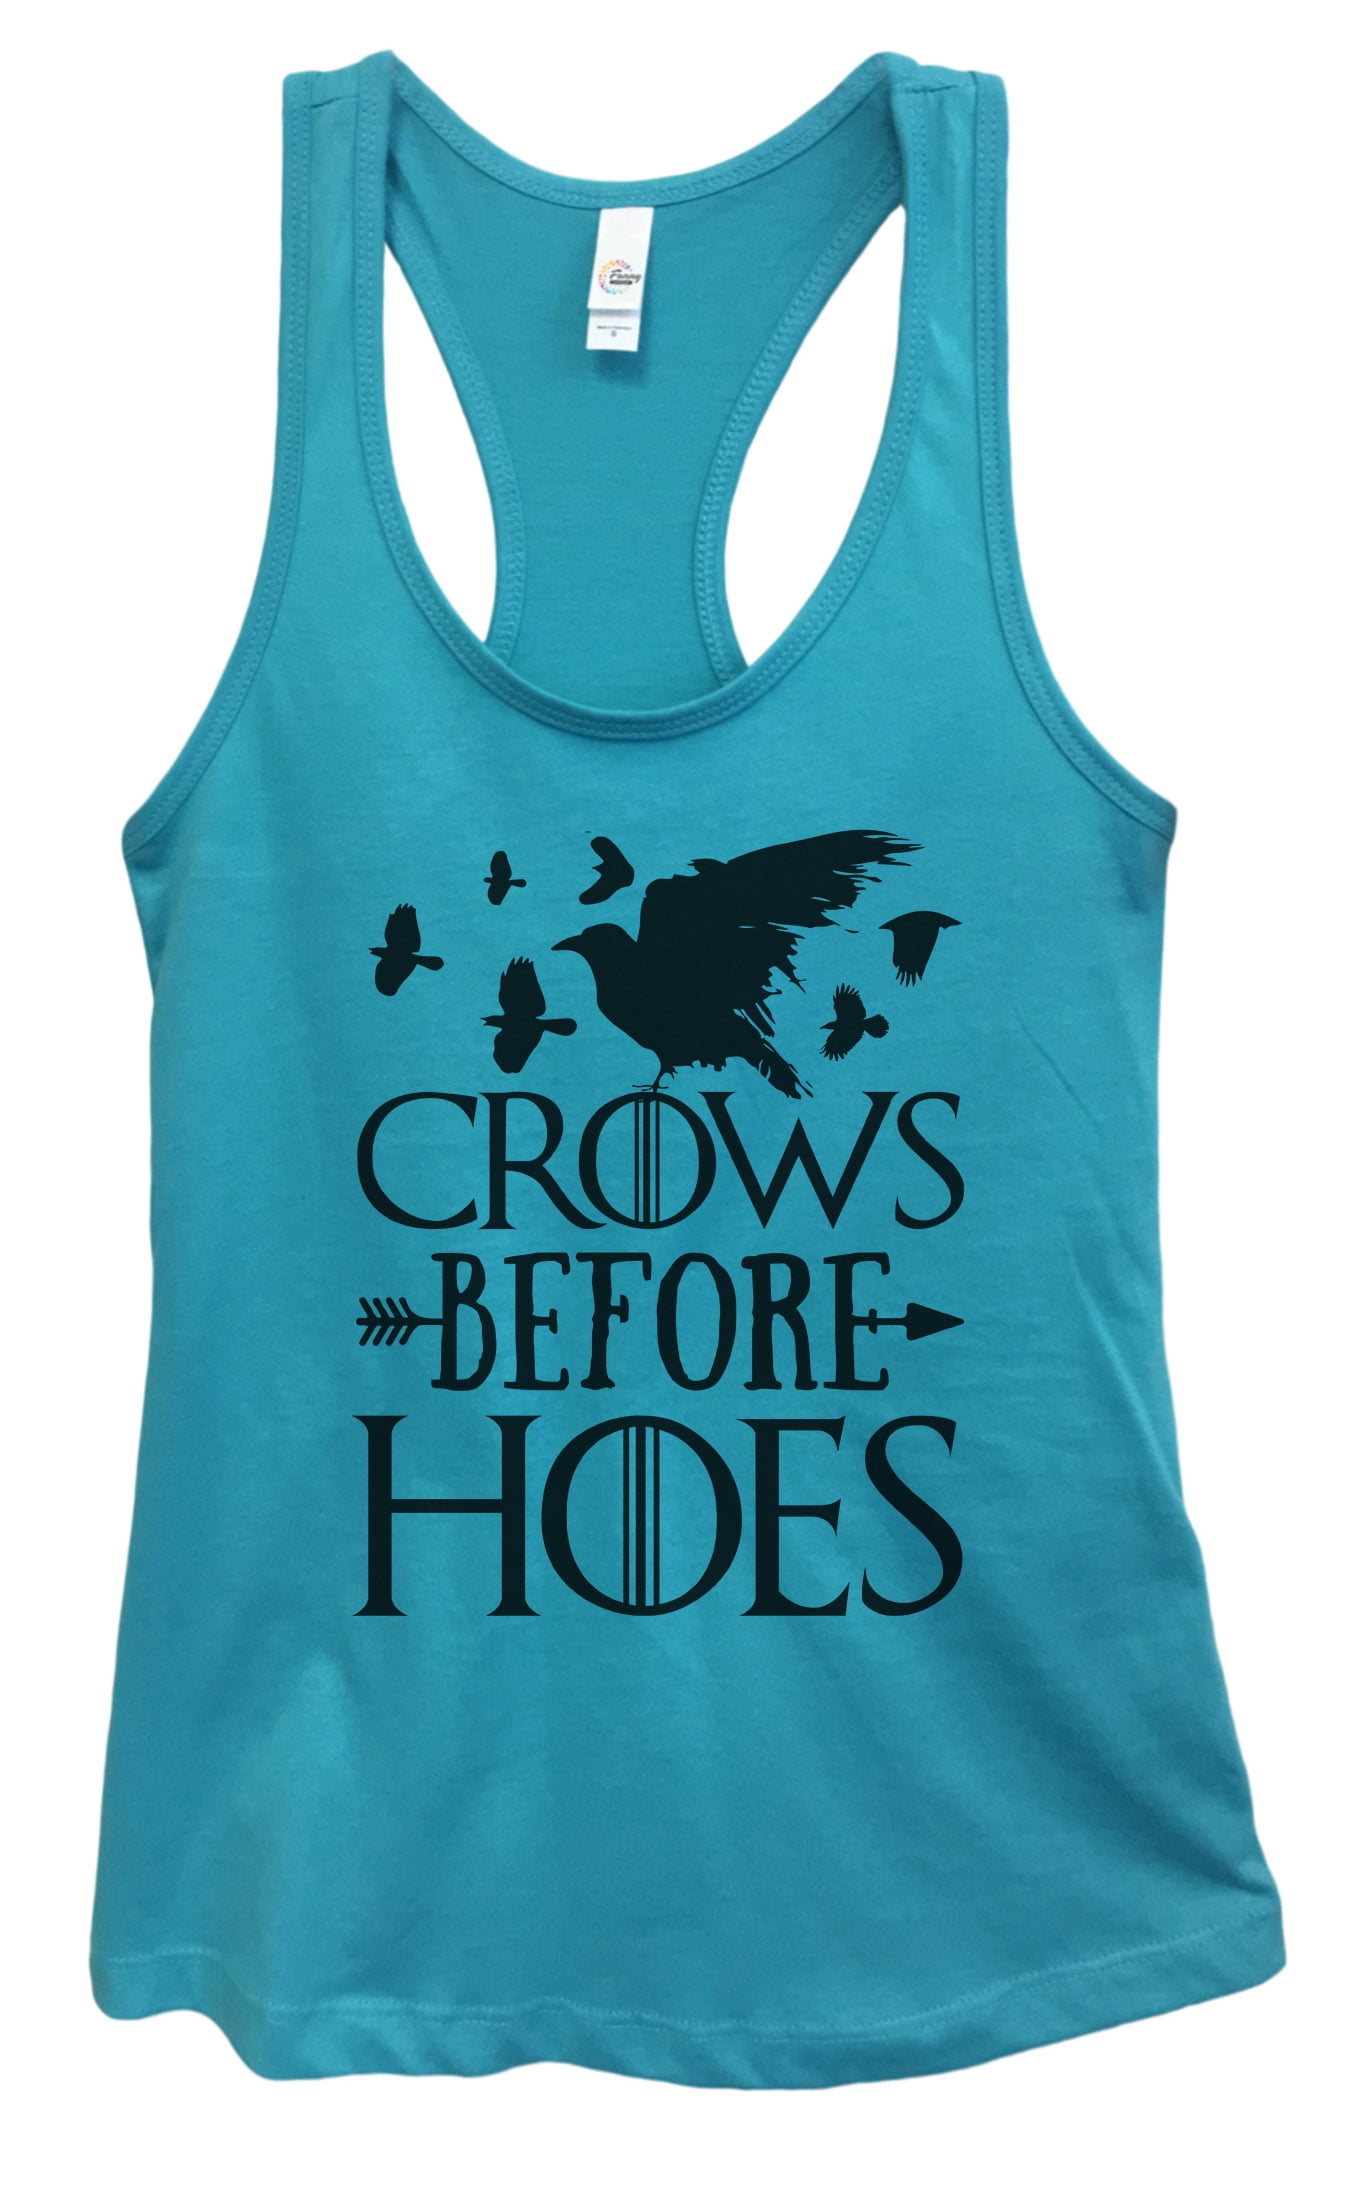 Crows Before Hoes Game of thrones inspired Mens funny printed vest tank Tshirt 